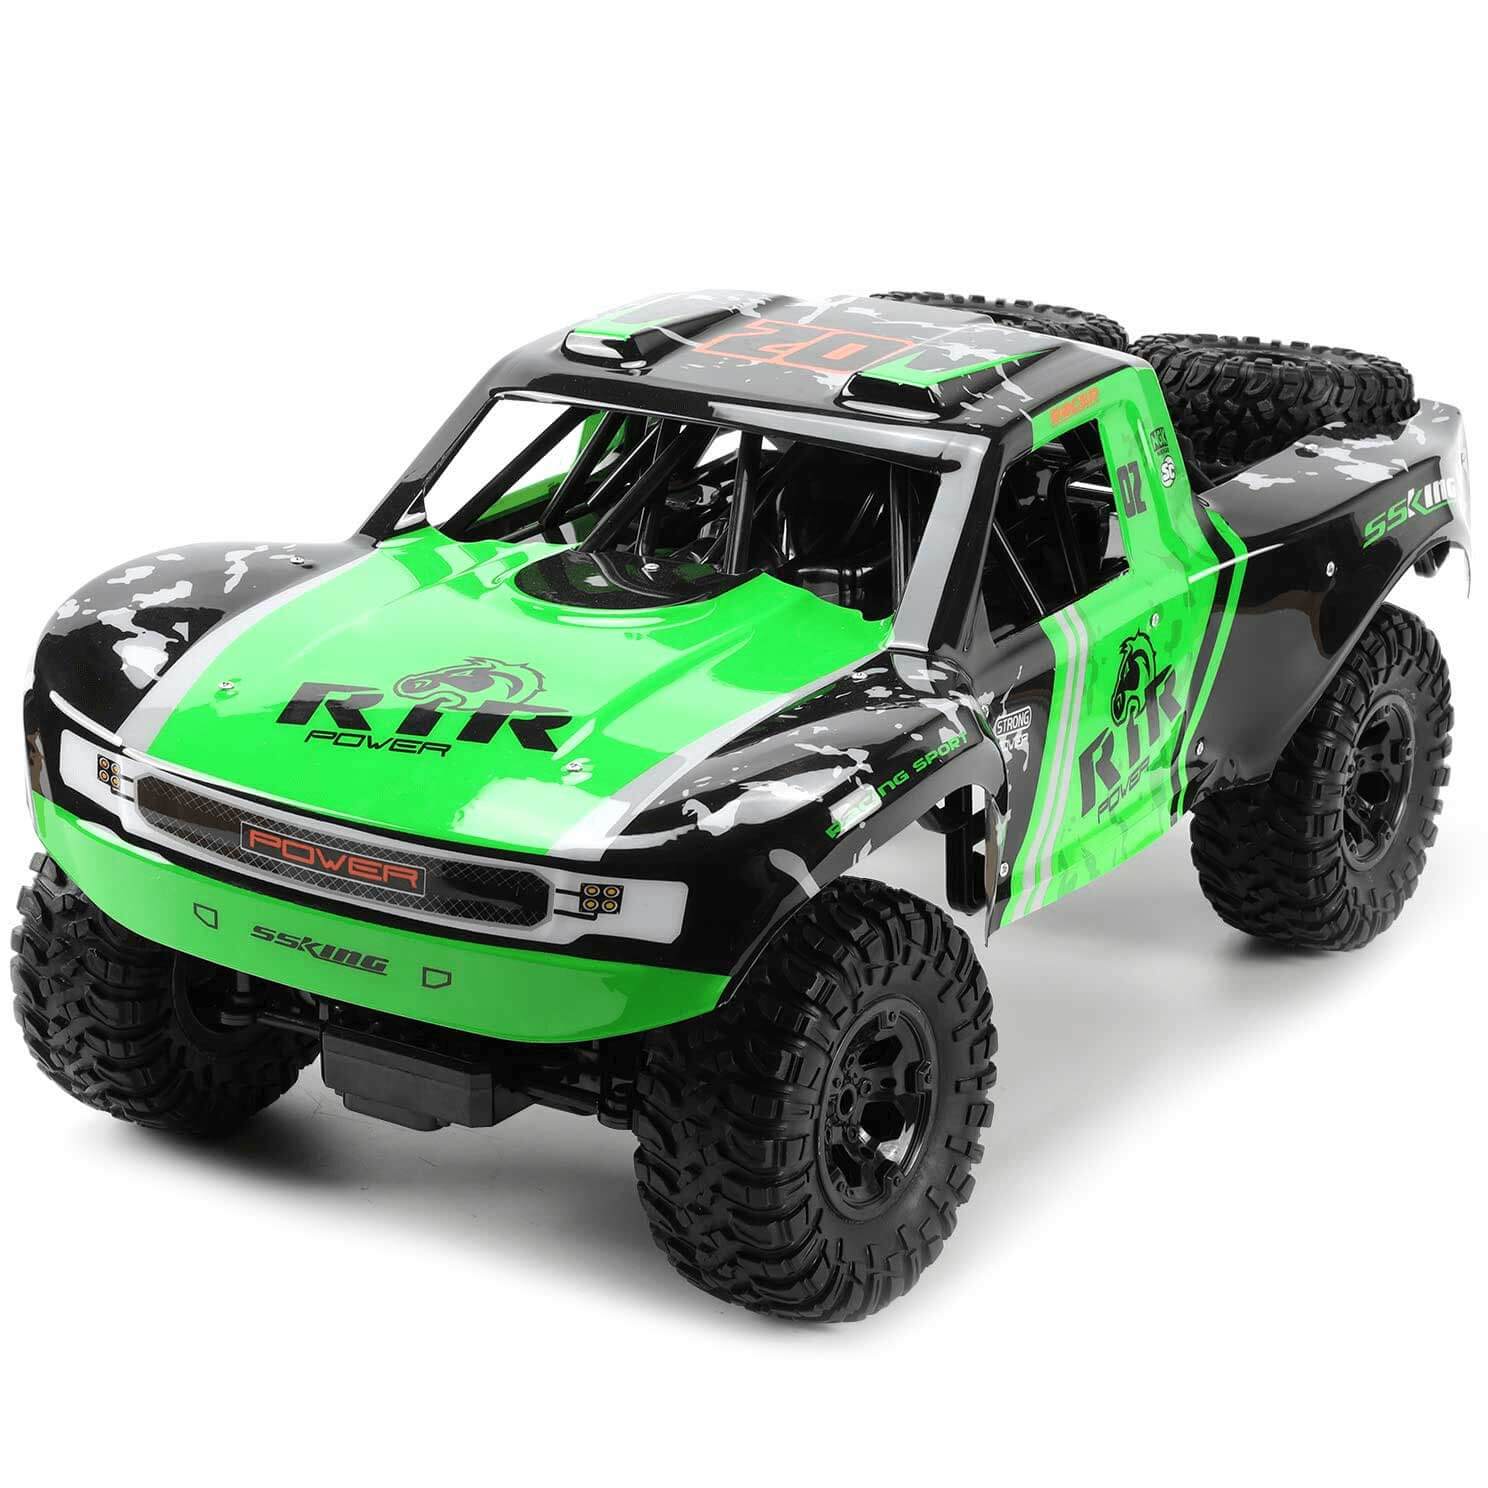 RC Vehicle Storage Bins « Big Squid RC – RC Car and Truck News, Reviews,  Videos, and More!